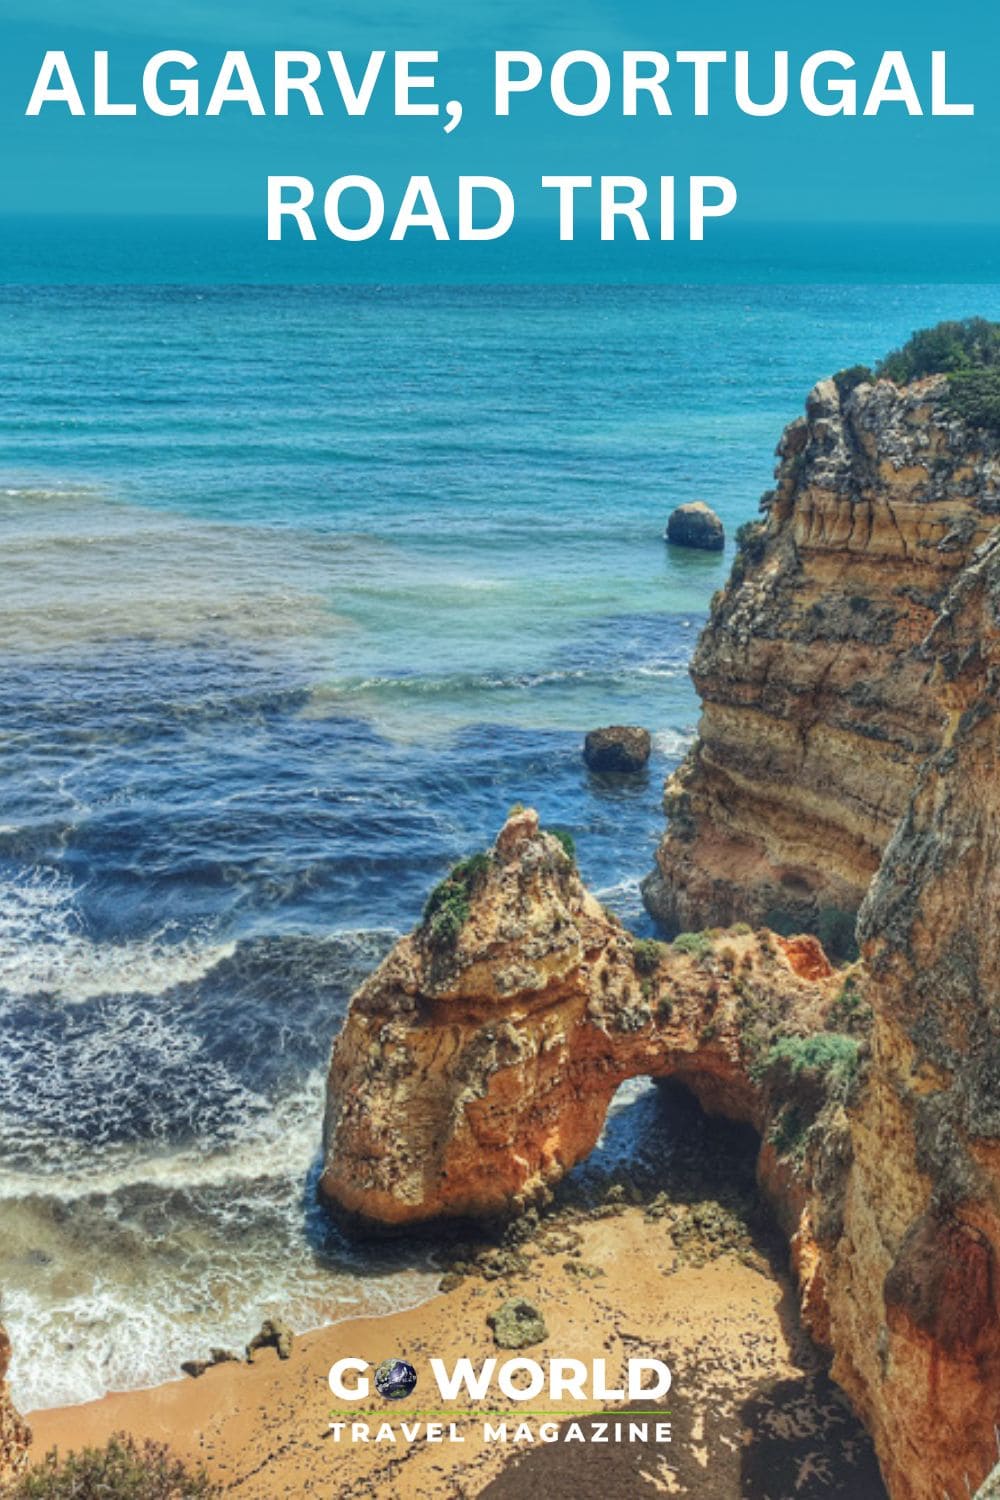 An Algarve road trip takes you along Portugal's coastal paradise, through lovely seaside towns and to stunningly beautiful, secluded beaches. #Portugal #Algarve